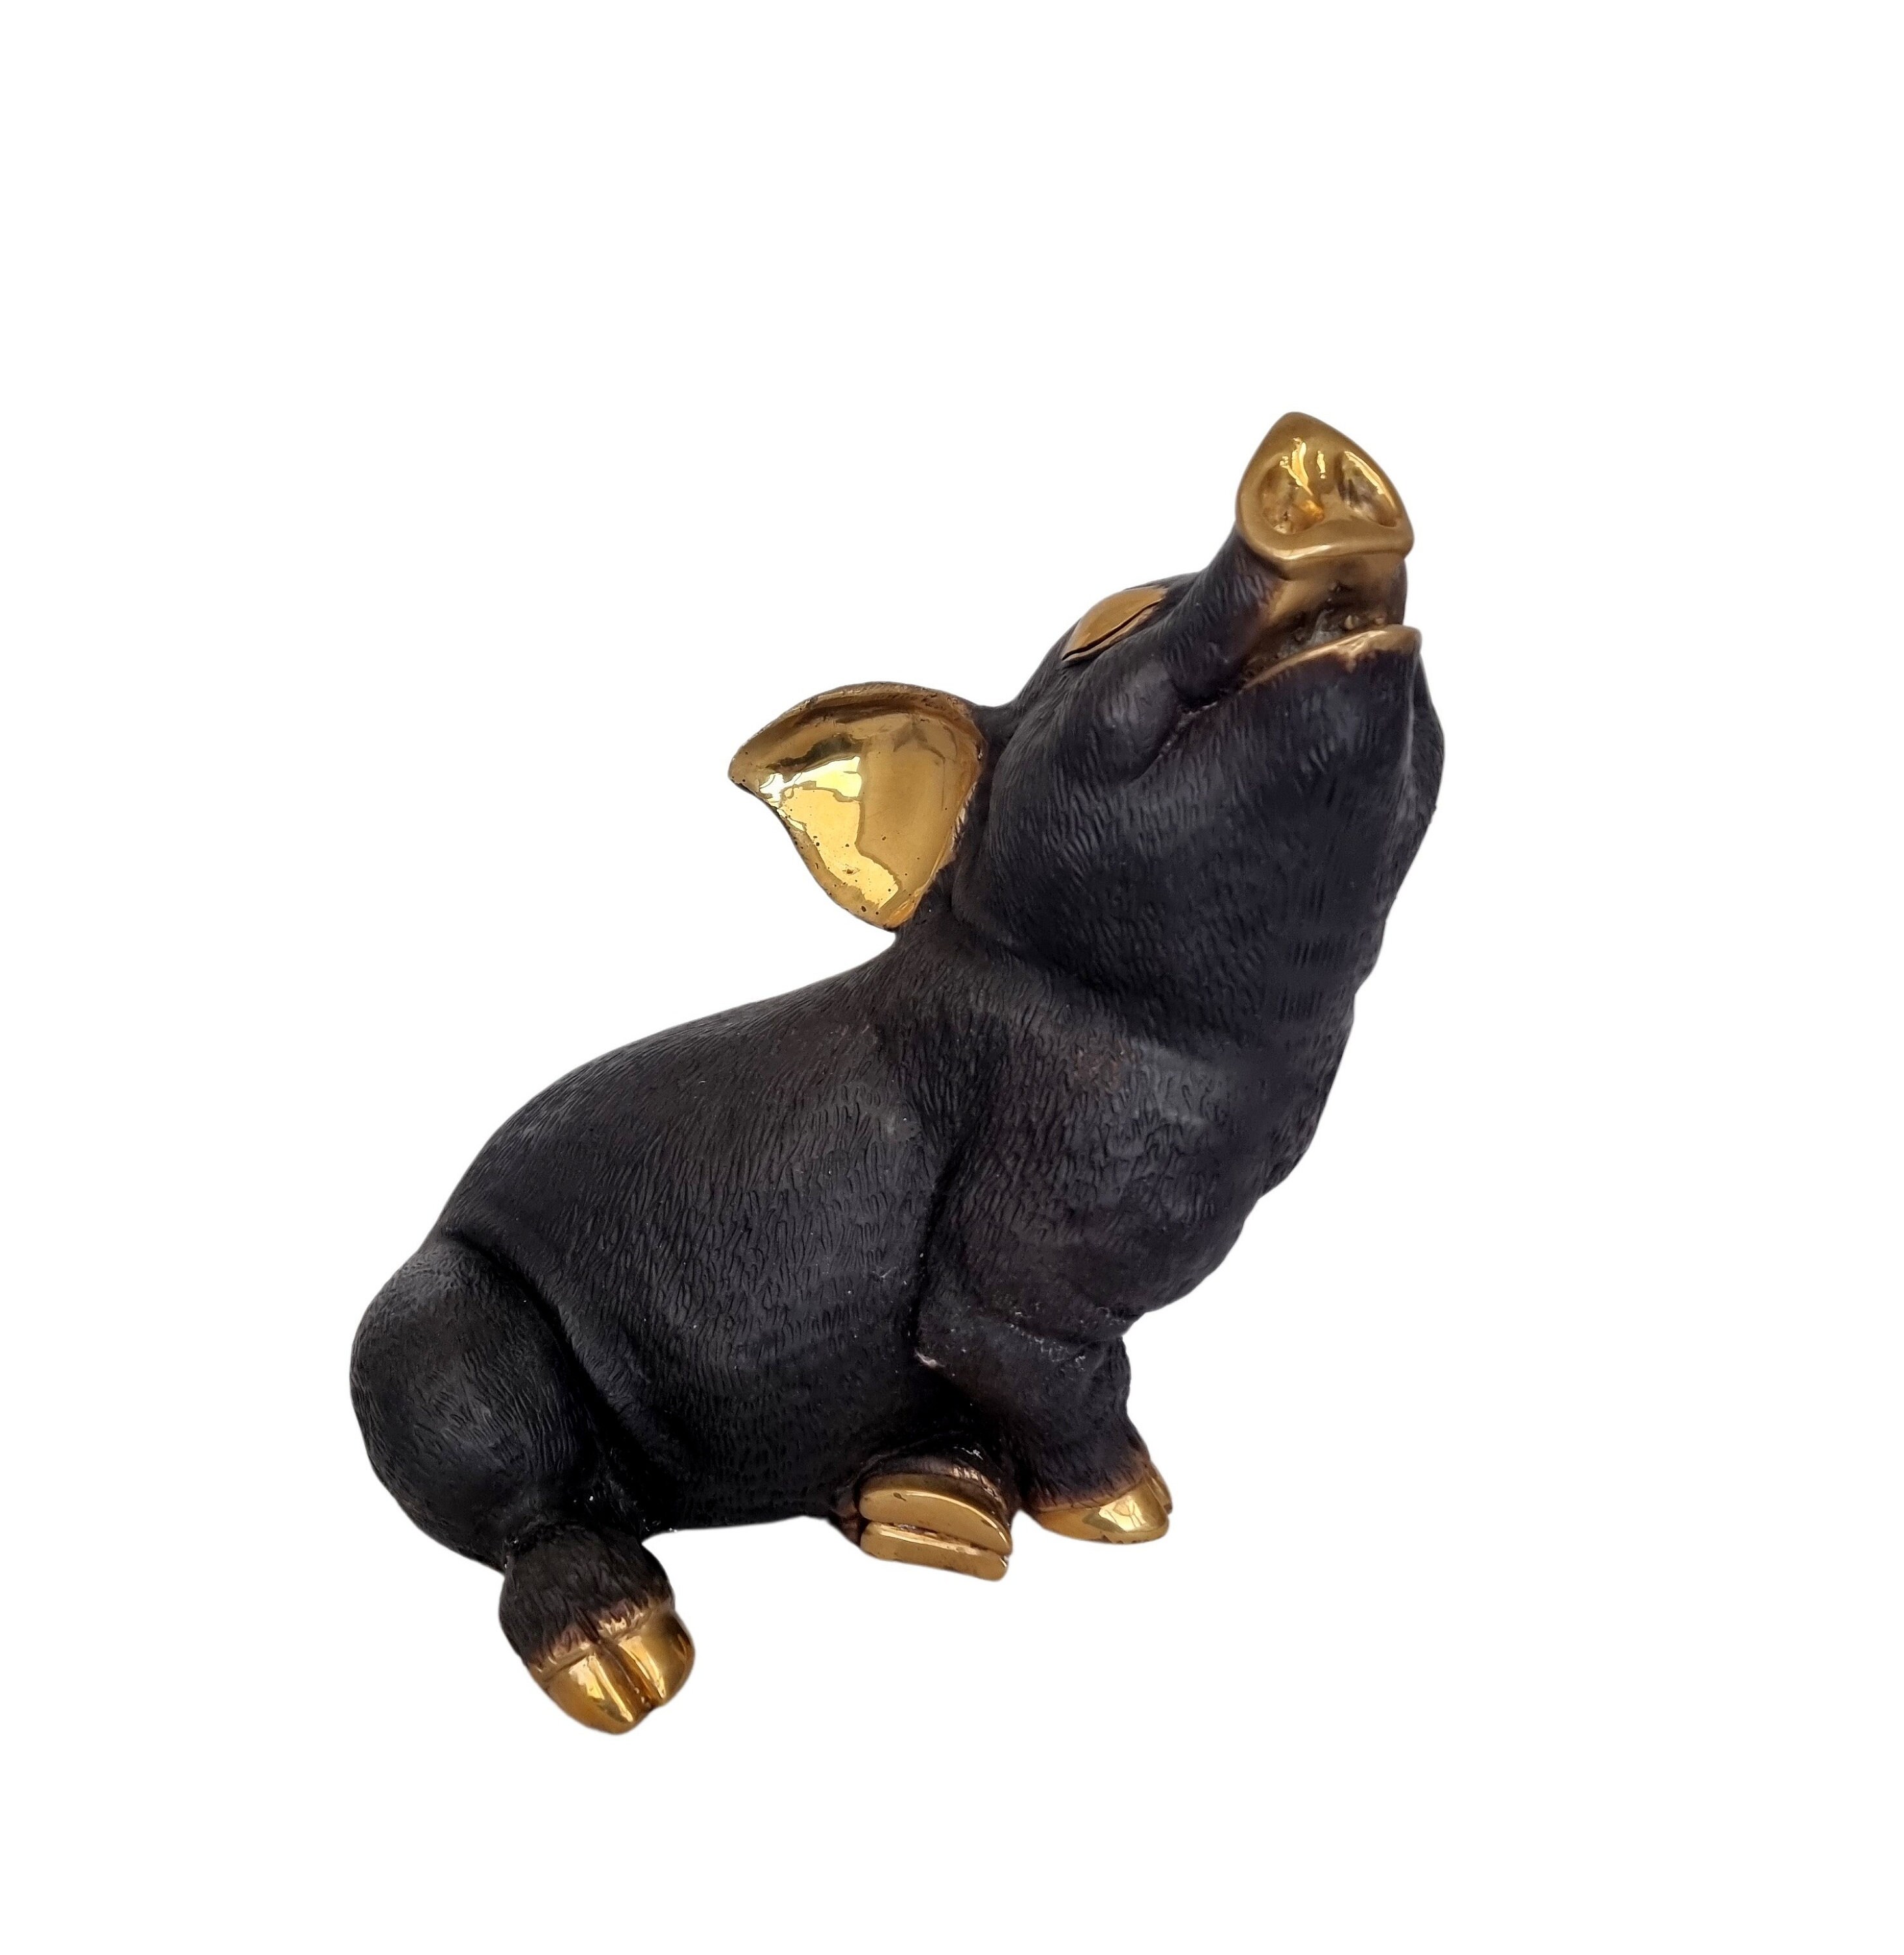 Little Pig Walking Piglet Resin Figurine Statue Ornament 9 Inches Wide Farm  Animal Yard Decoration Pigs Lawn Ornament 